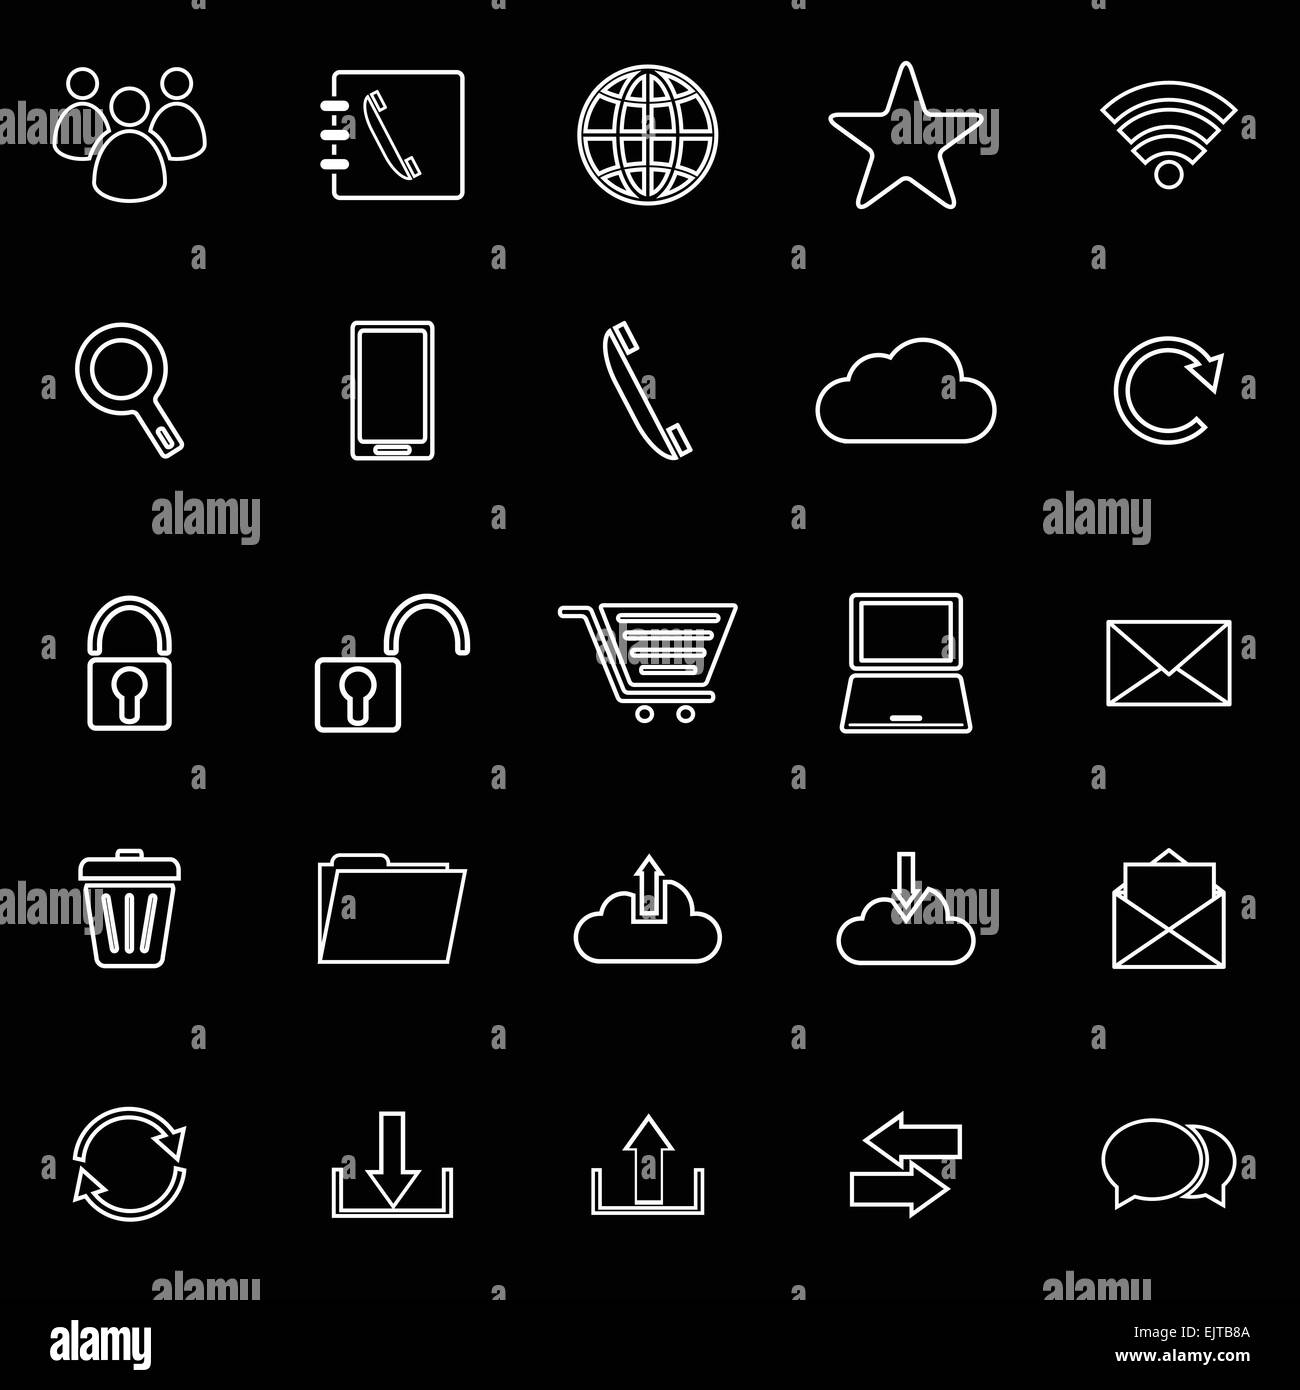 Communication line icons on black background, stock vector Stock Vector